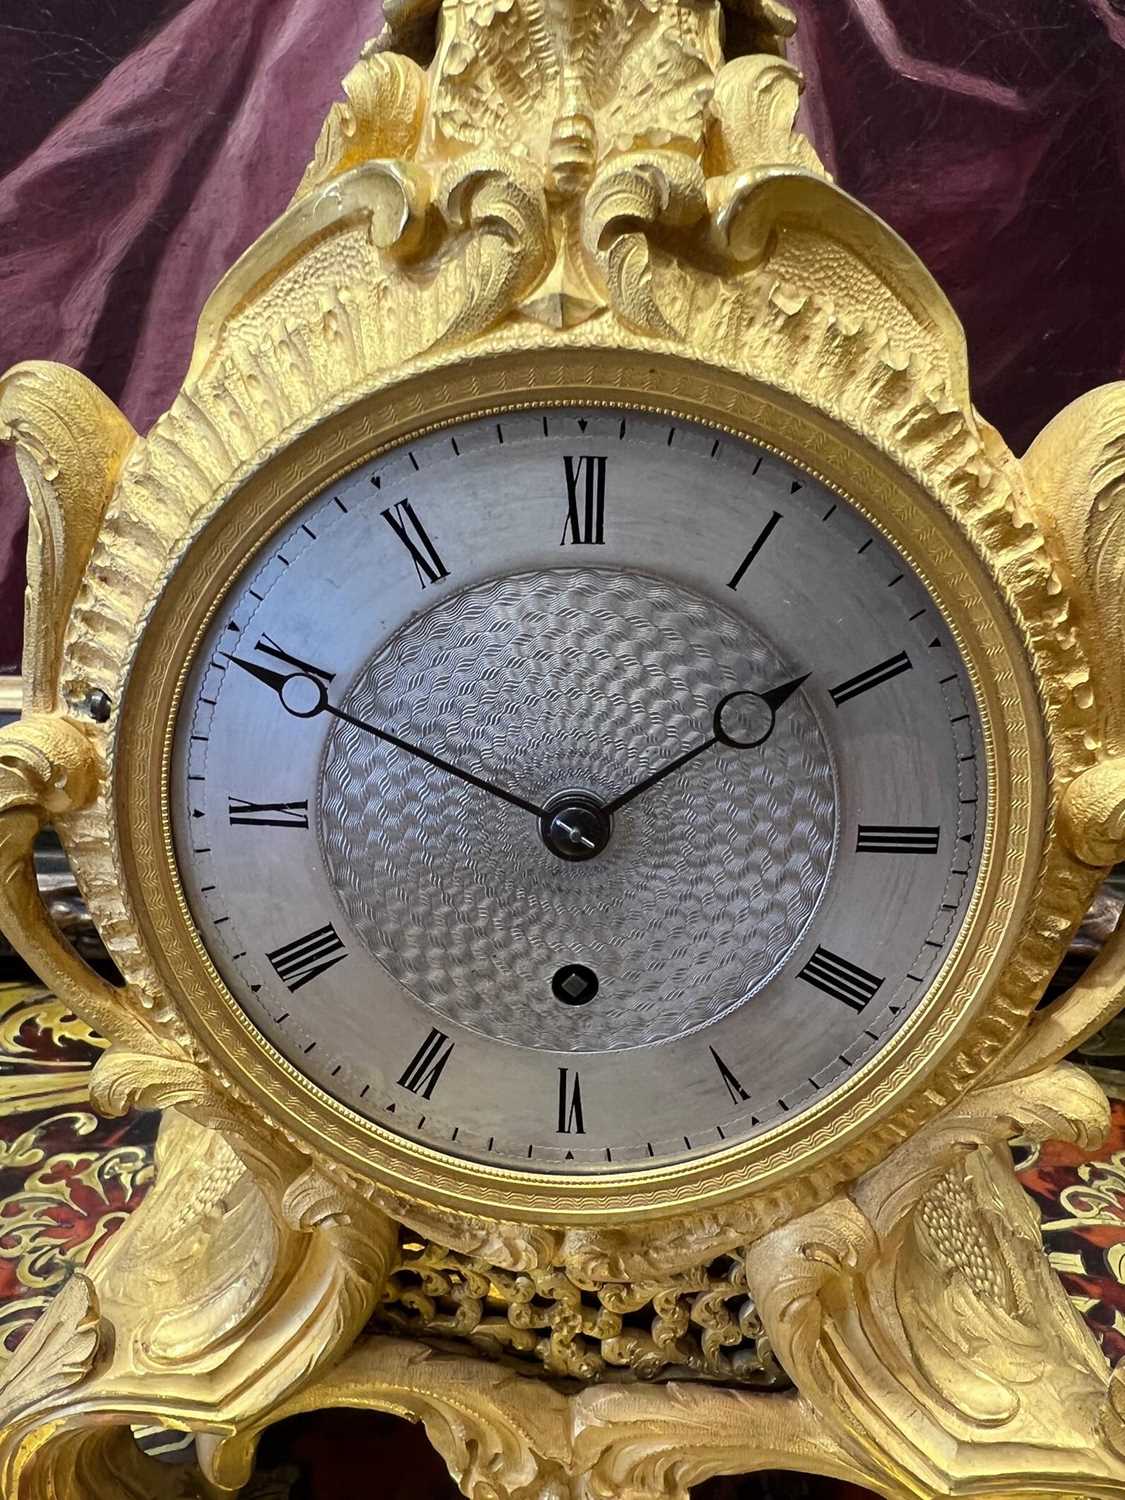 A FINE 1840'S ENGLISH GILT BRONZE MANTEL CLOCK BY HENRY BLUNDELL, LONDON - Image 9 of 12